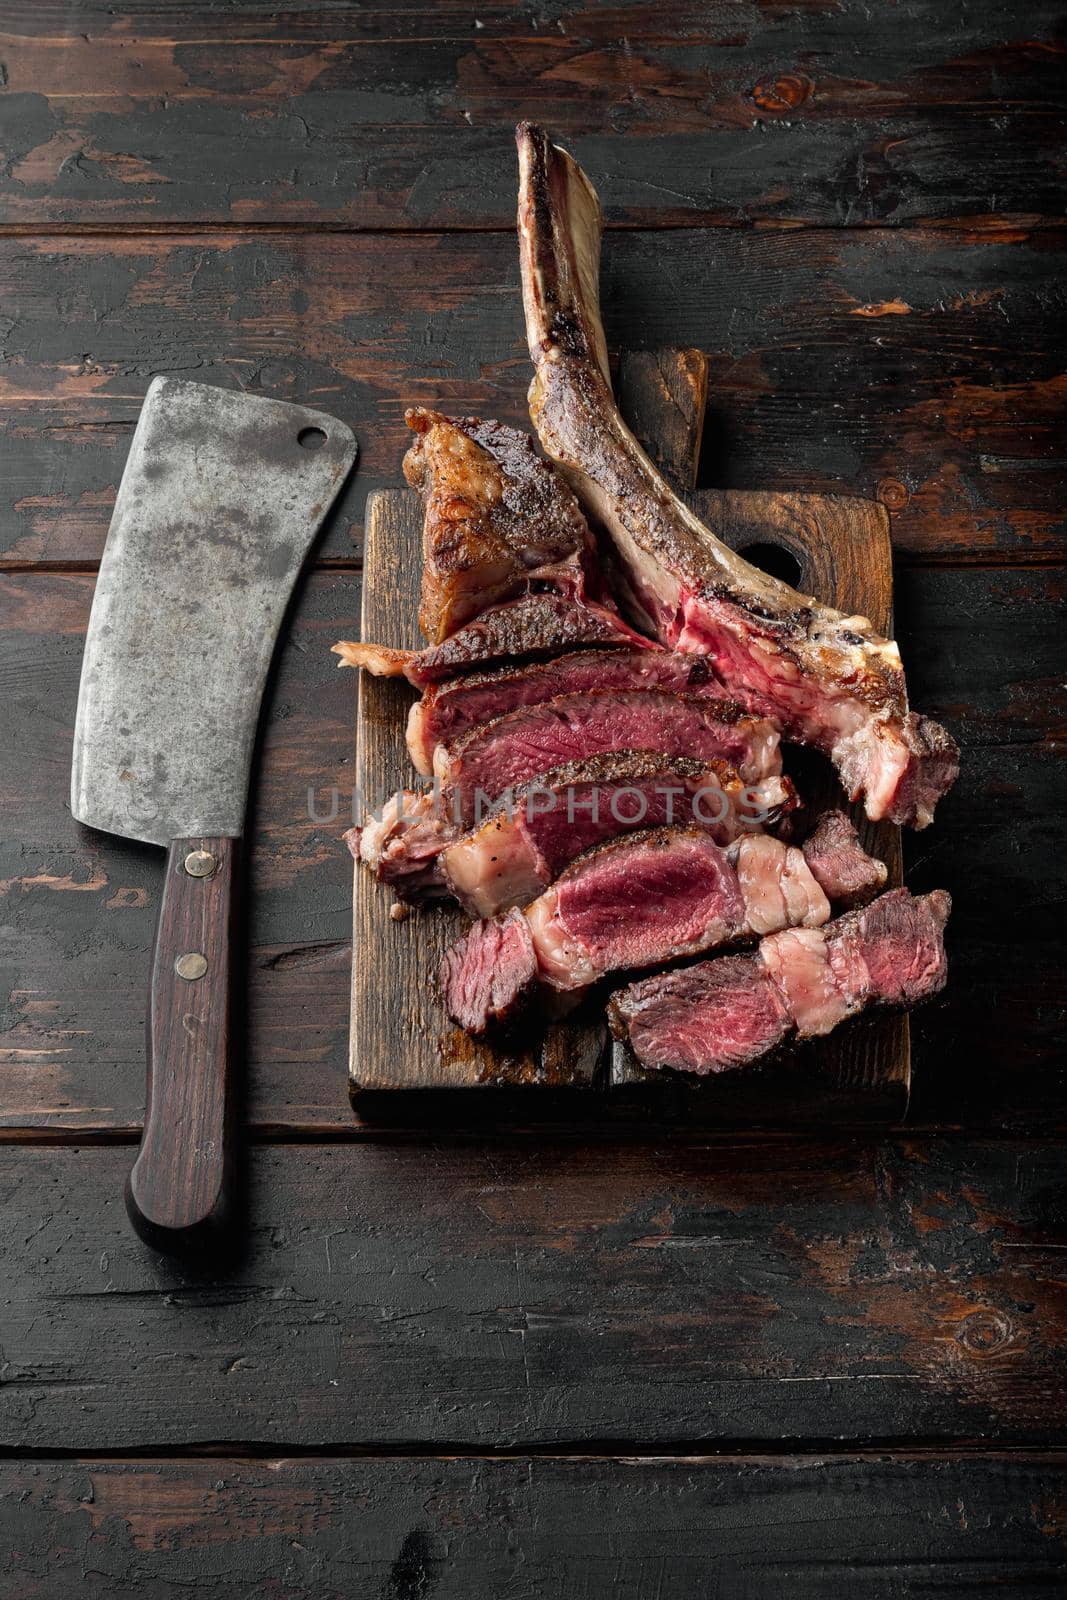 Sliced medium rare grilled Beef steak, tomahawk cut, on wooden serving board, on old dark wooden table background, with copy space for text by Ilianesolenyi